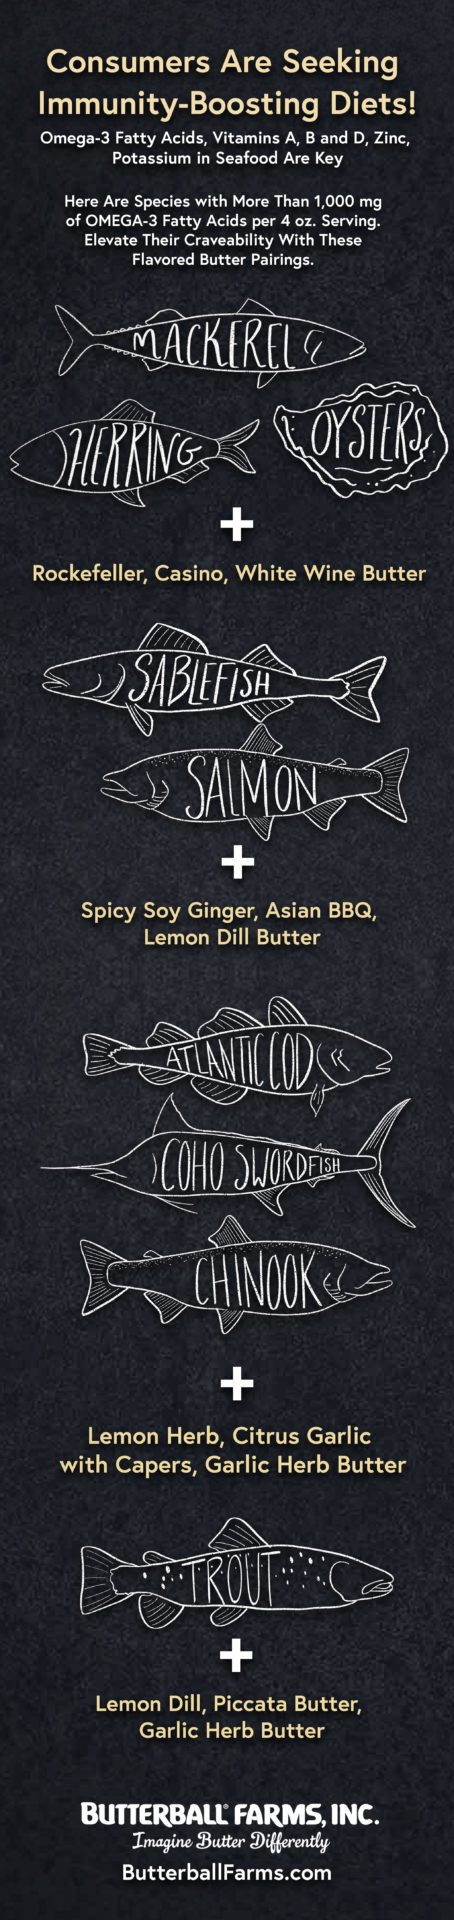 Fish and Butter Pairings